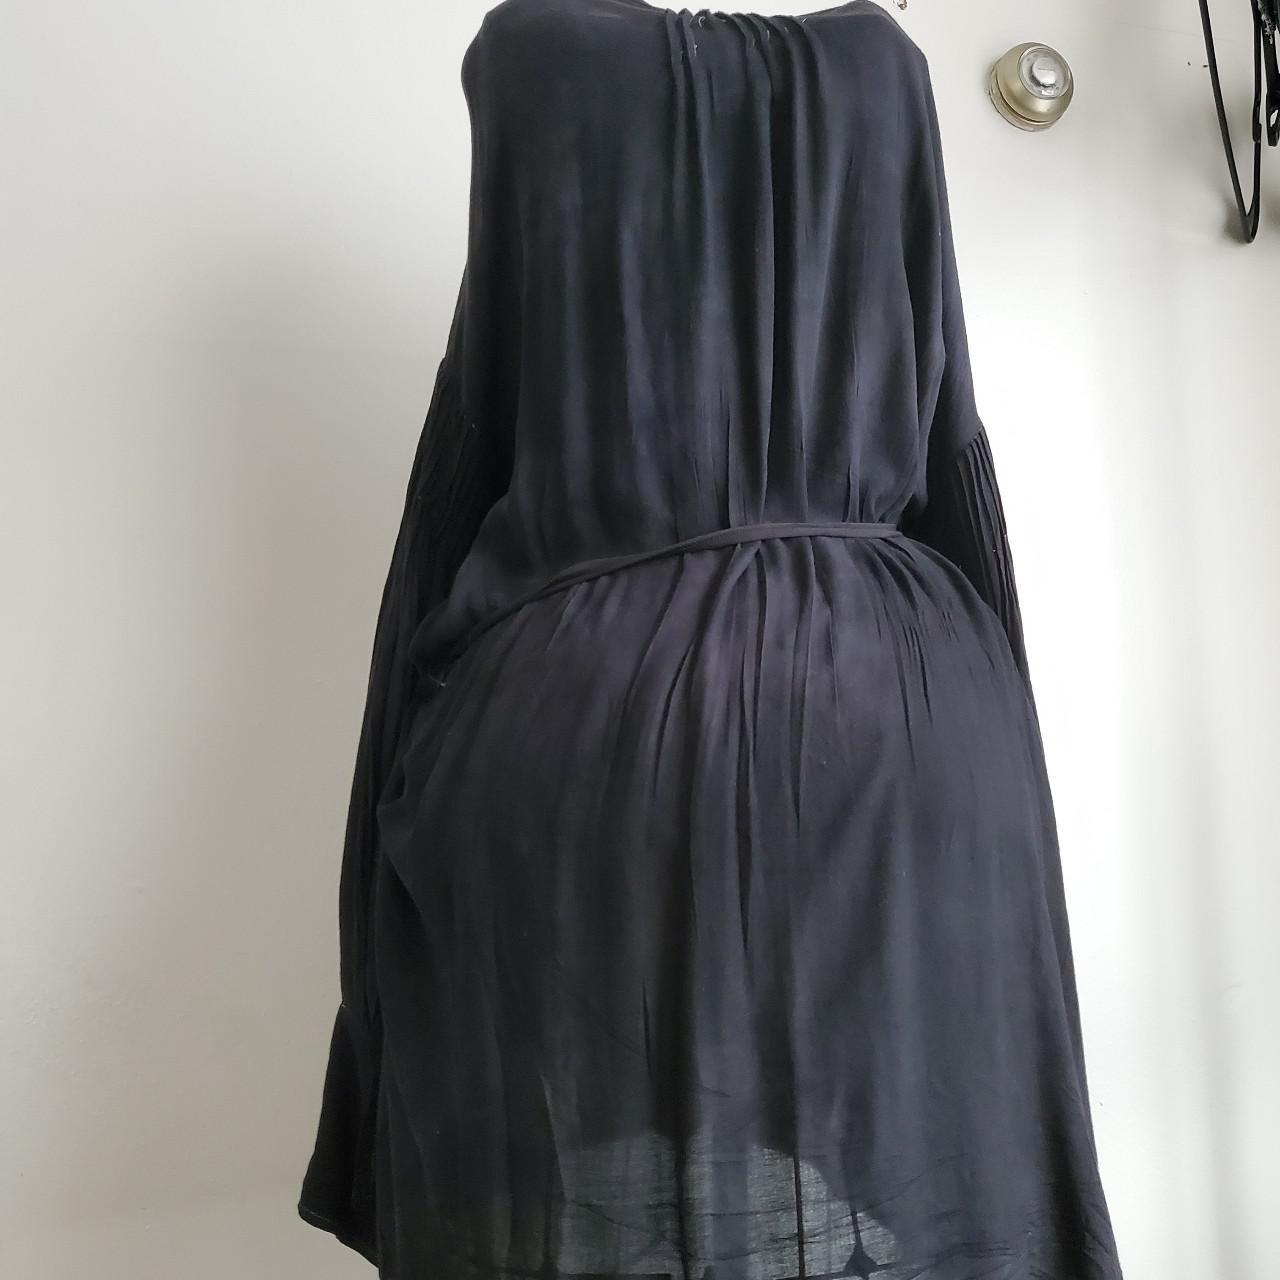 Product Image 2 - Ann demeulemeester tunic dress with